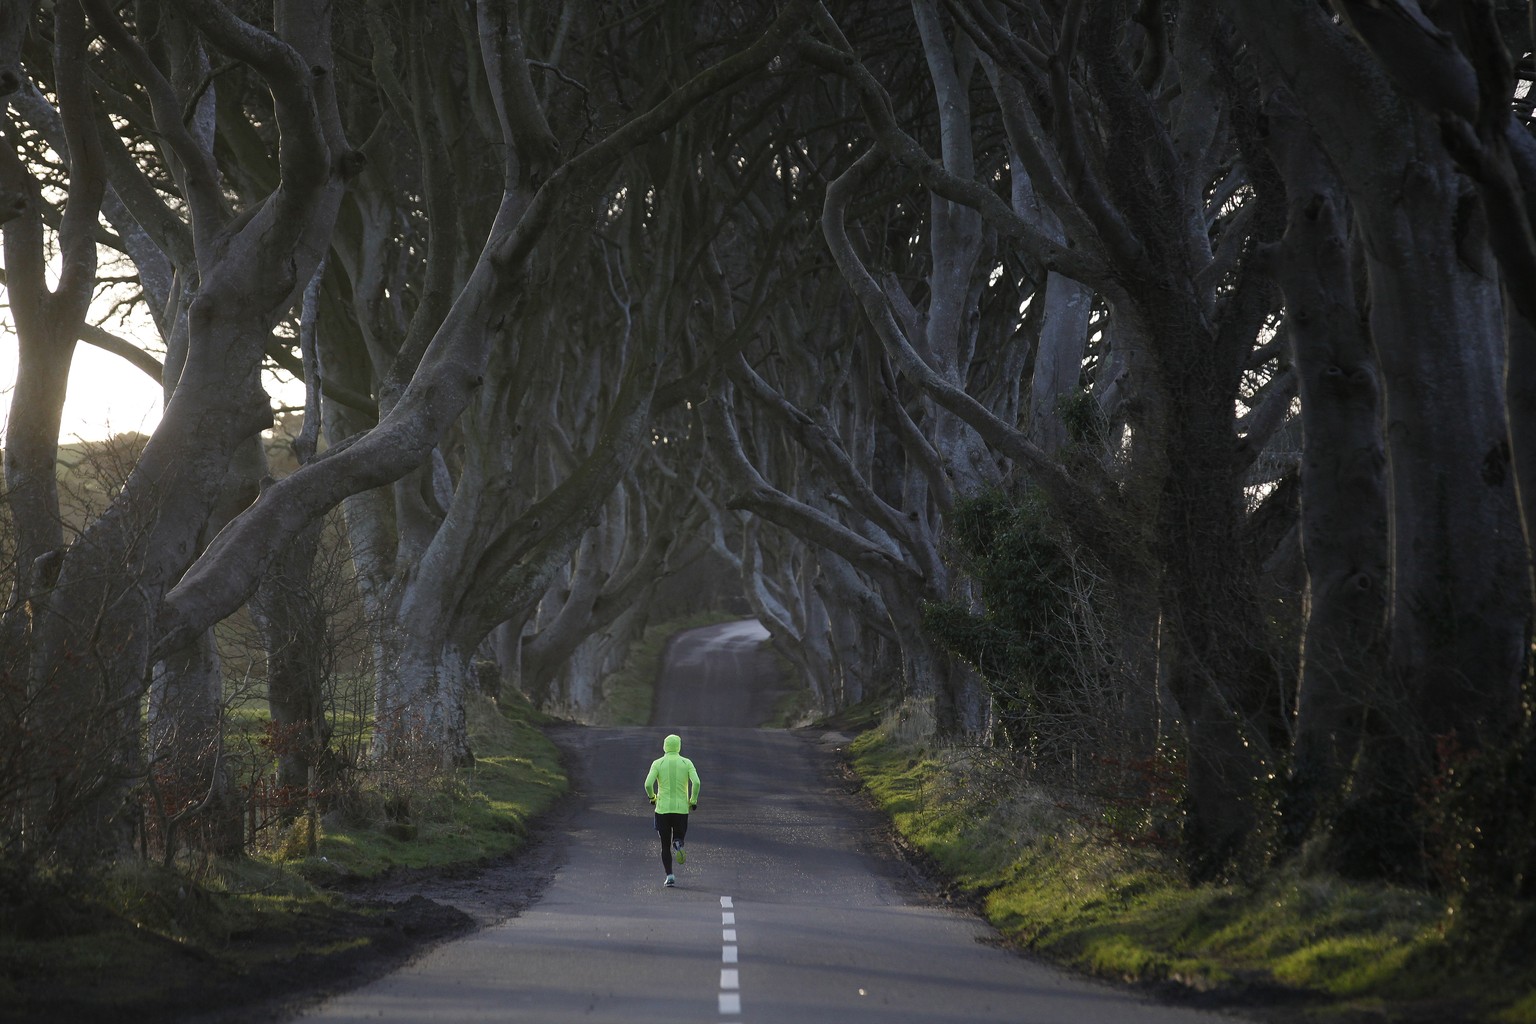 A jogger runs along Bregagh Road at Dark Hedges, Armoy, Northern Ireland, Wednesday, Feb. 10, 2016. Road markings have been painted by mistake on the world famous road that features the Dark Hedges tr ...